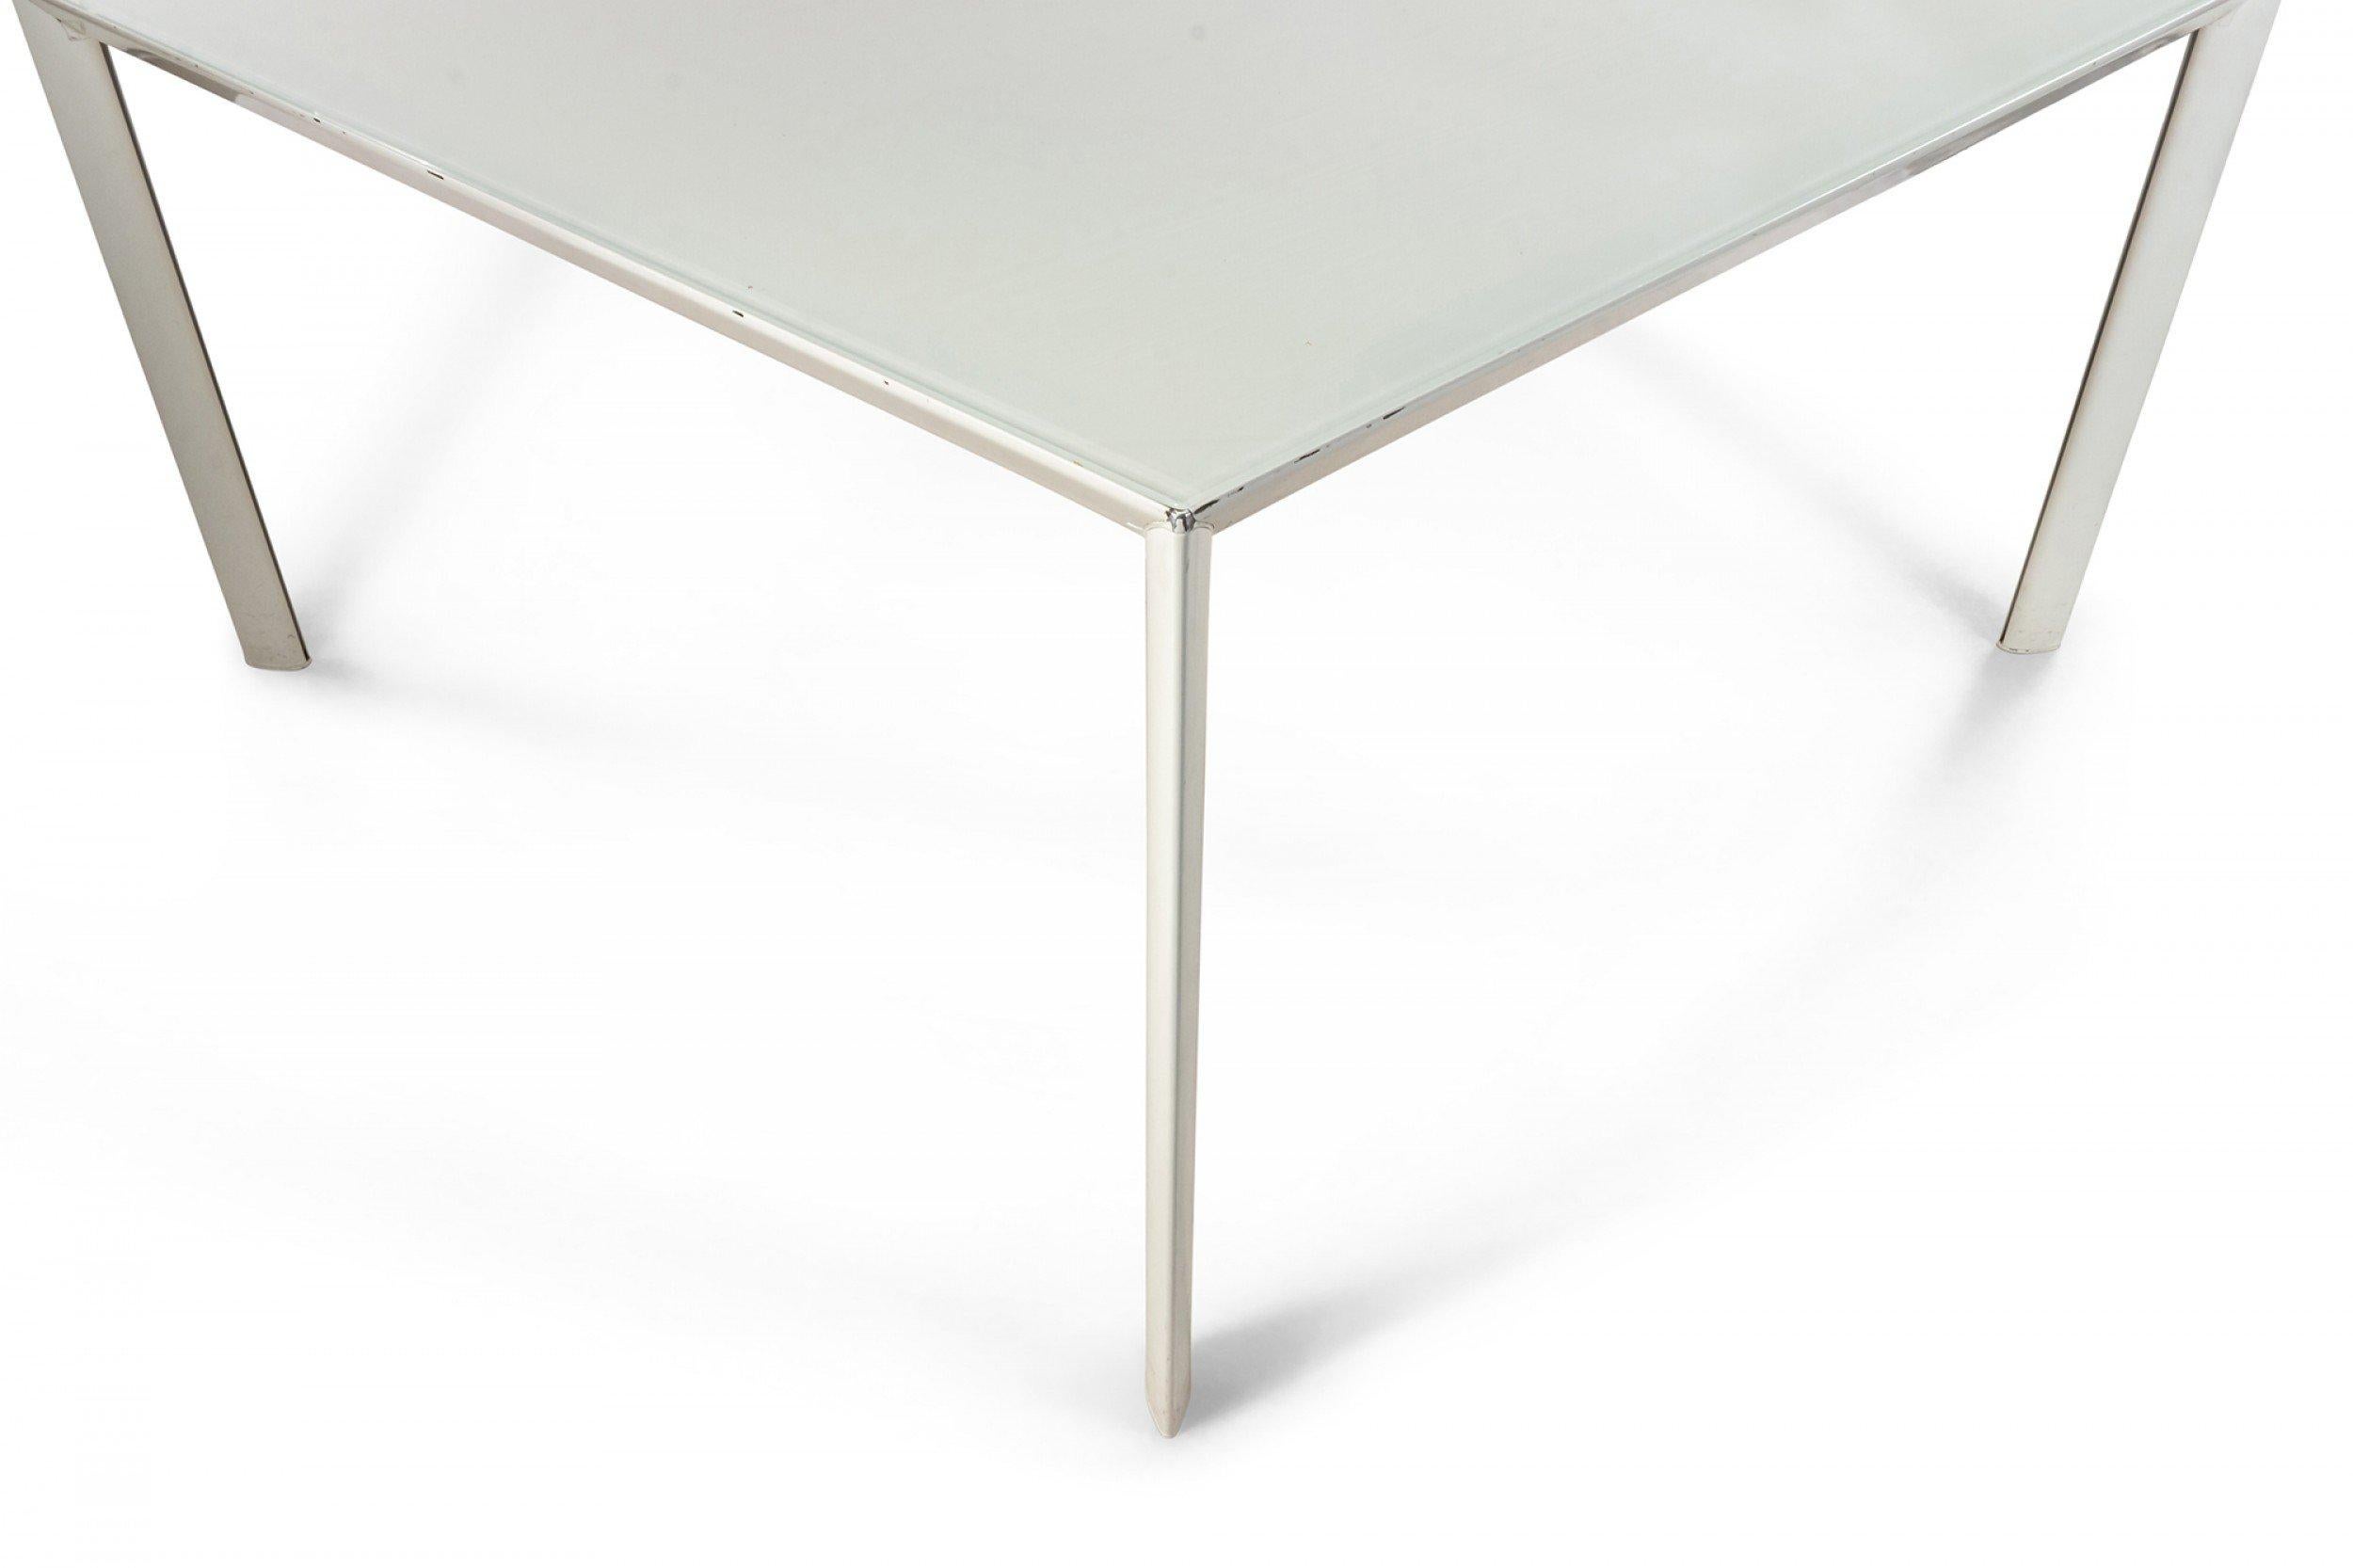 2 Contemporary large white glass square work tables with white metal legs (PORRO)(priced each).